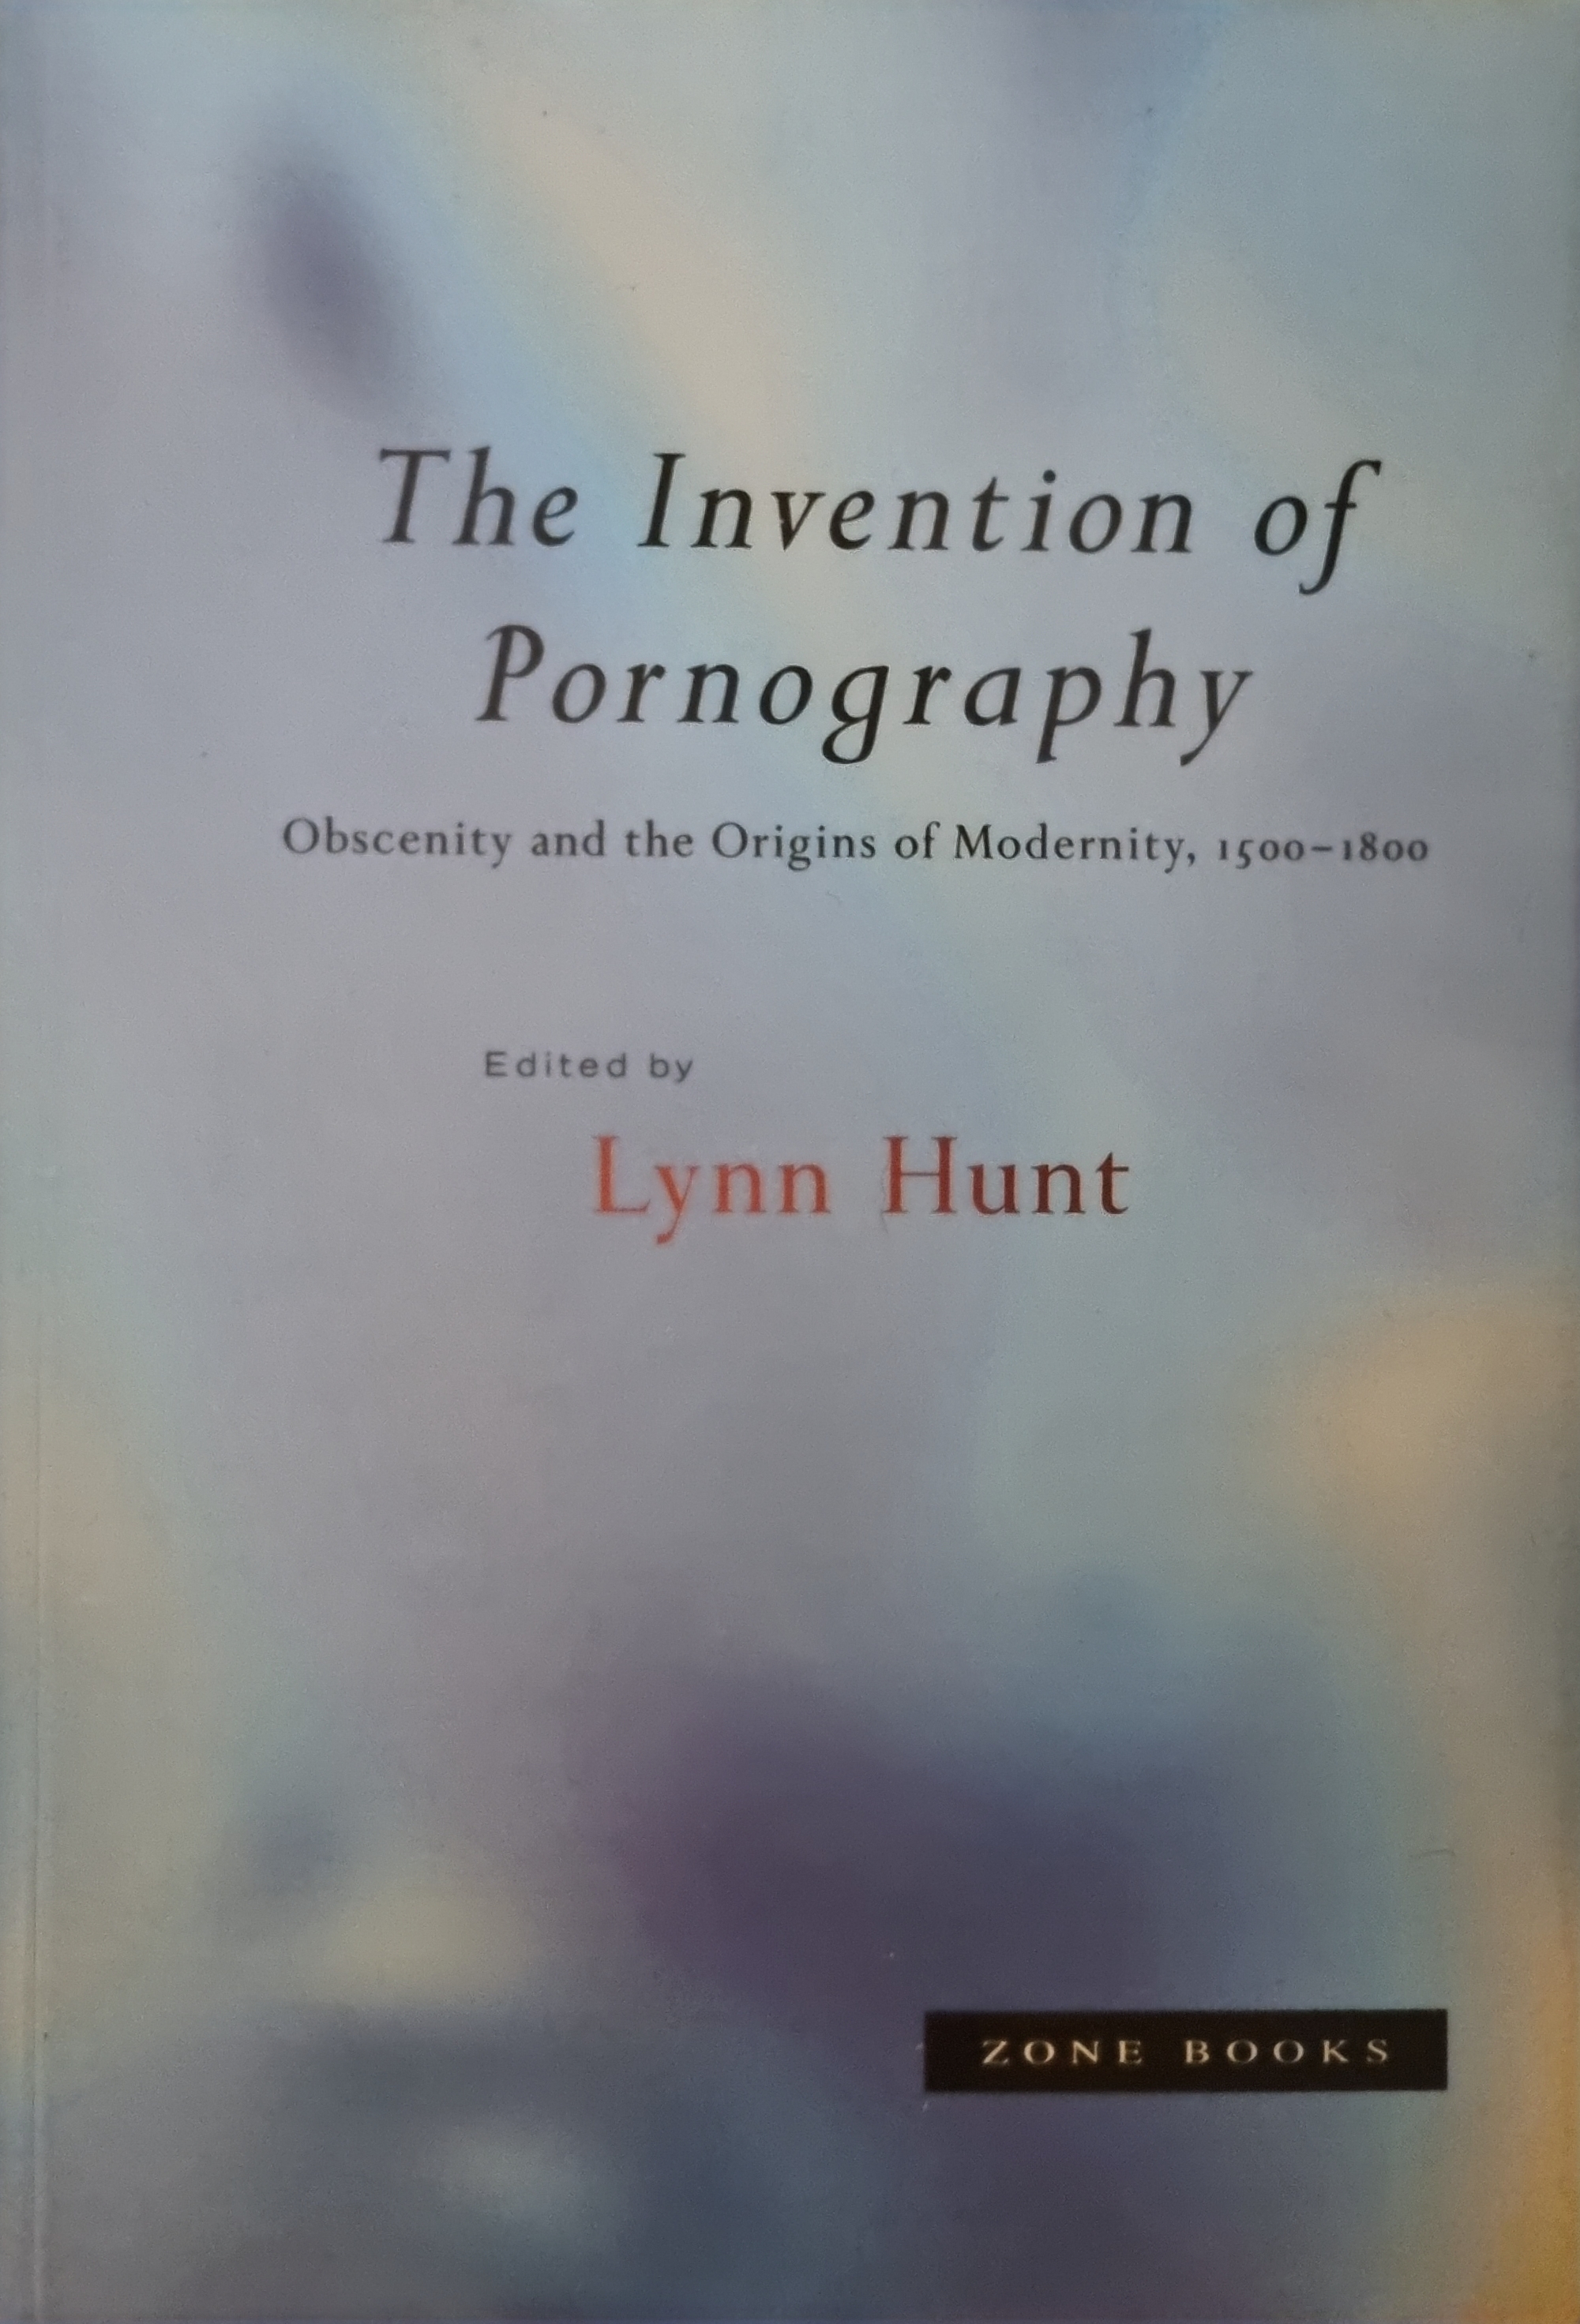 The Invention of Pornography: Obscenity and the Origins of Modernity, 1500-1800